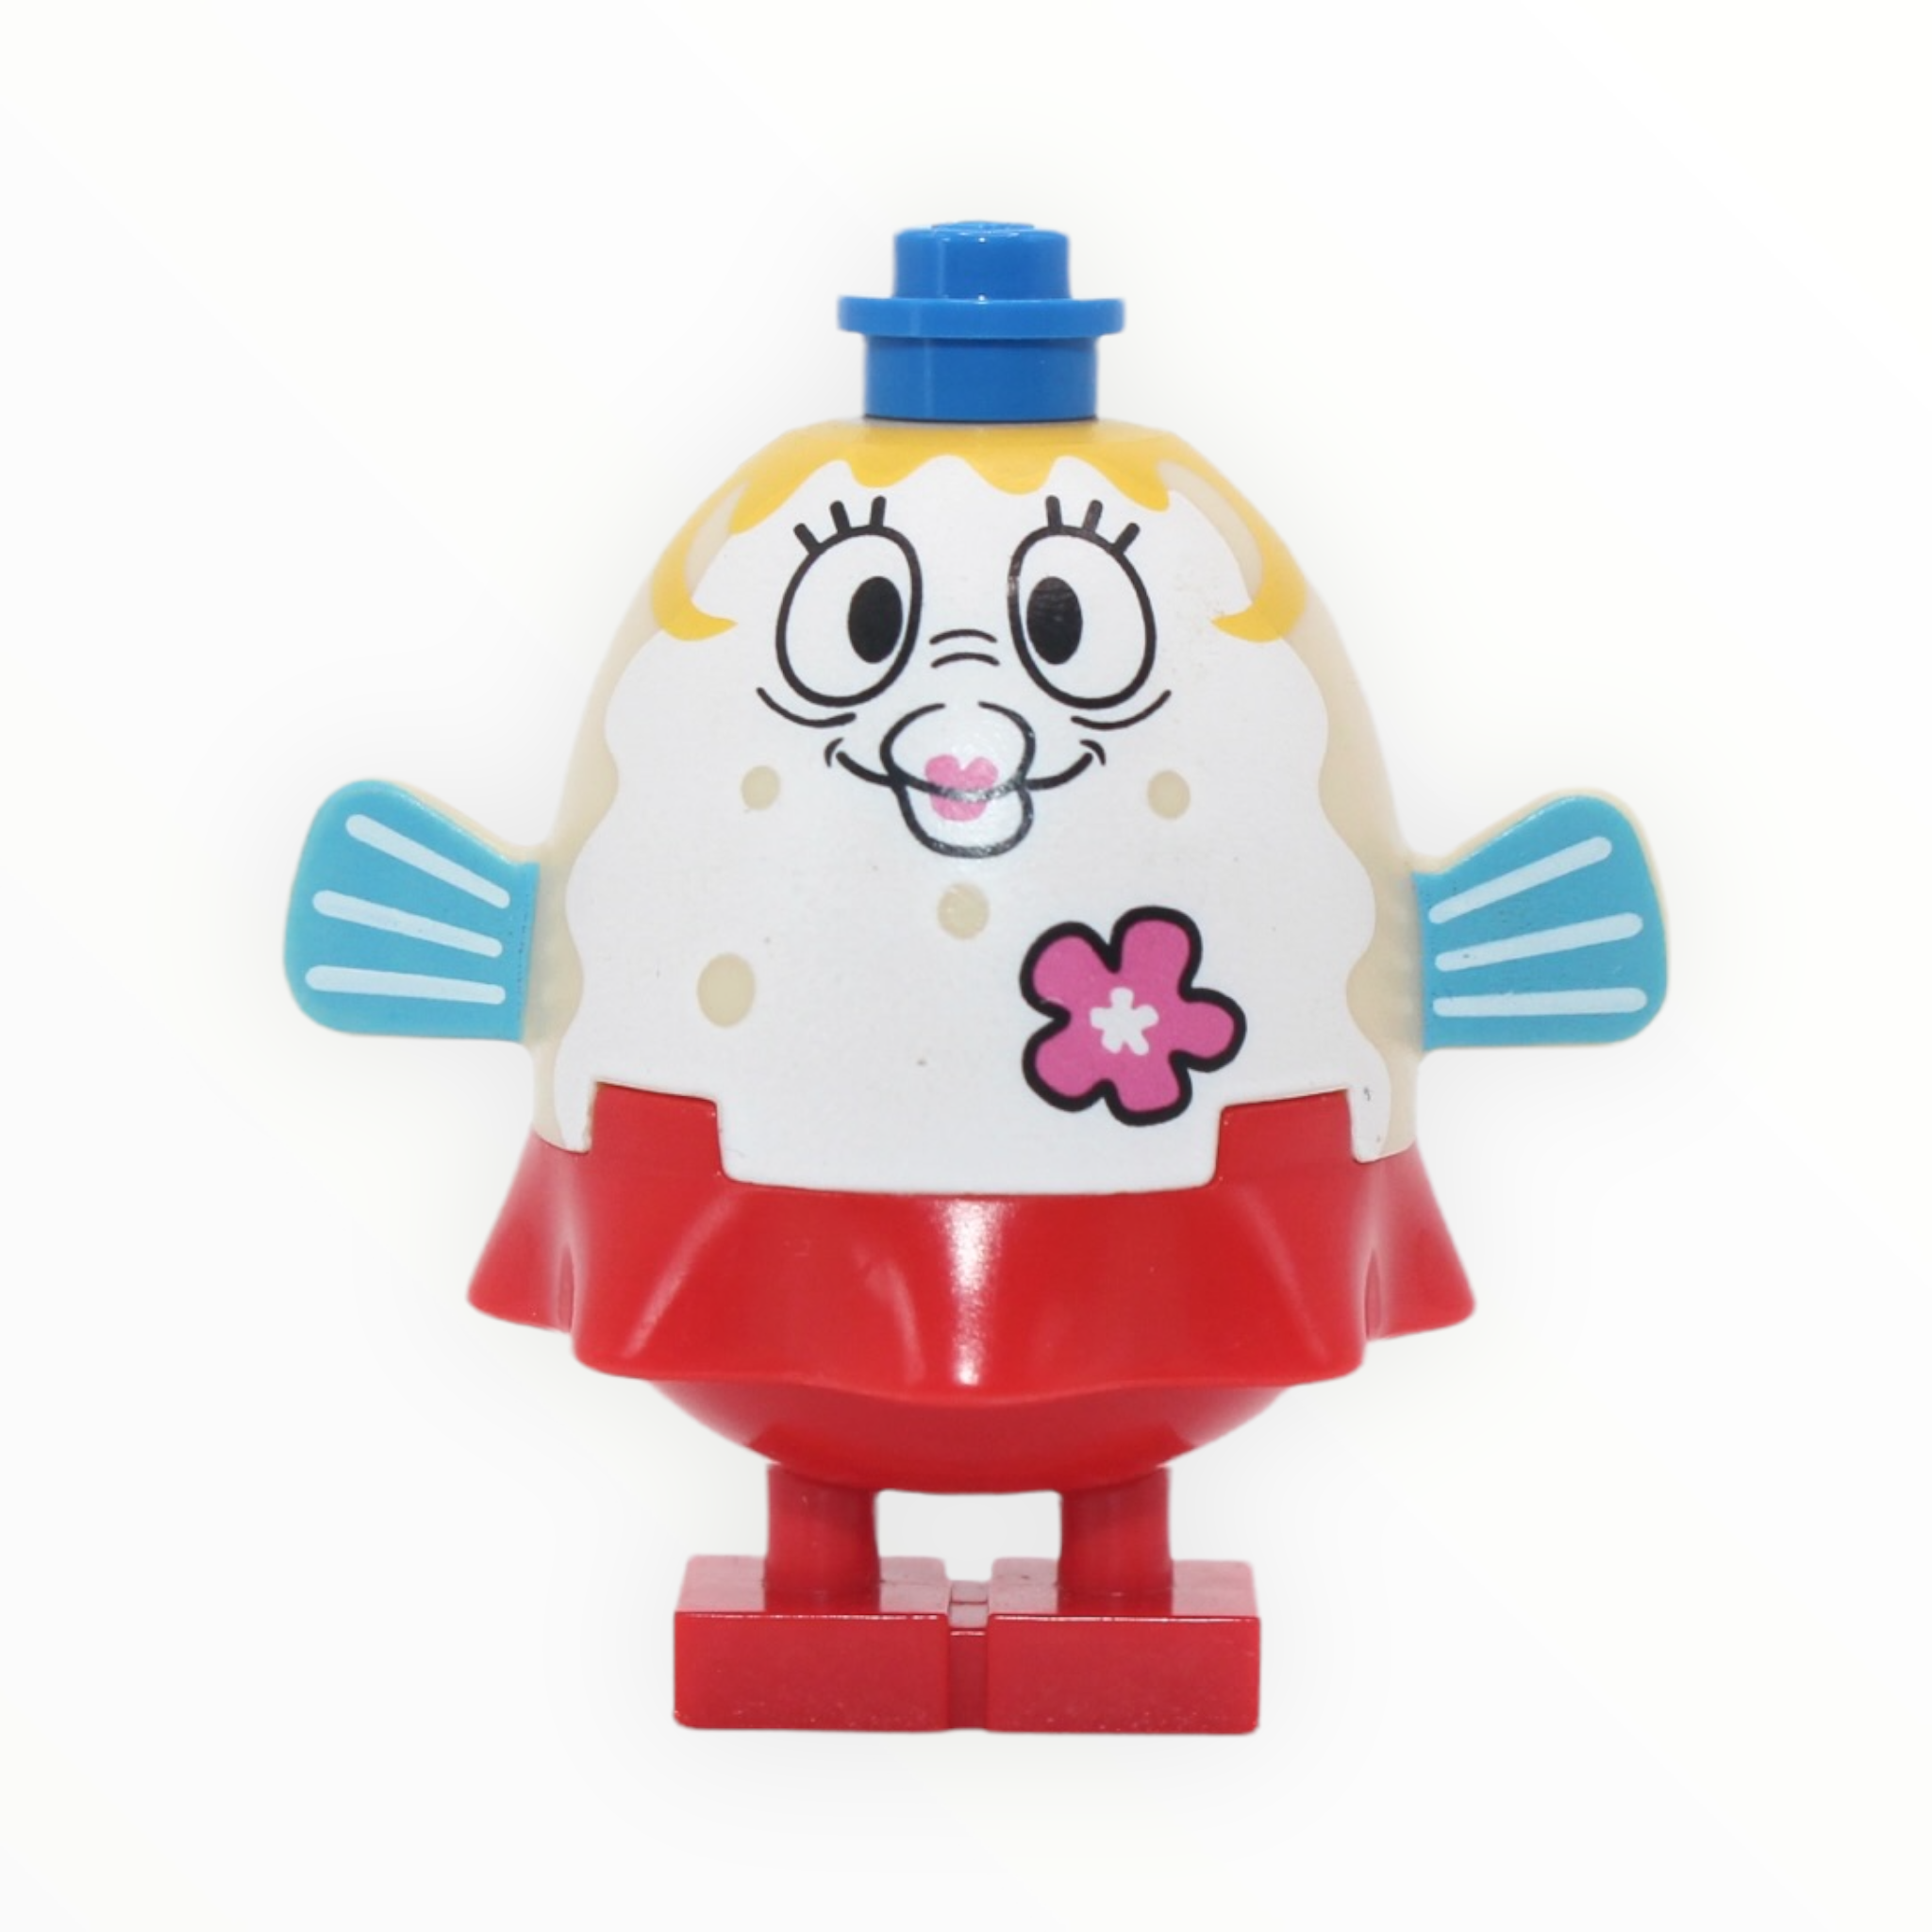 Mrs. Puff (smiling, pink flower)